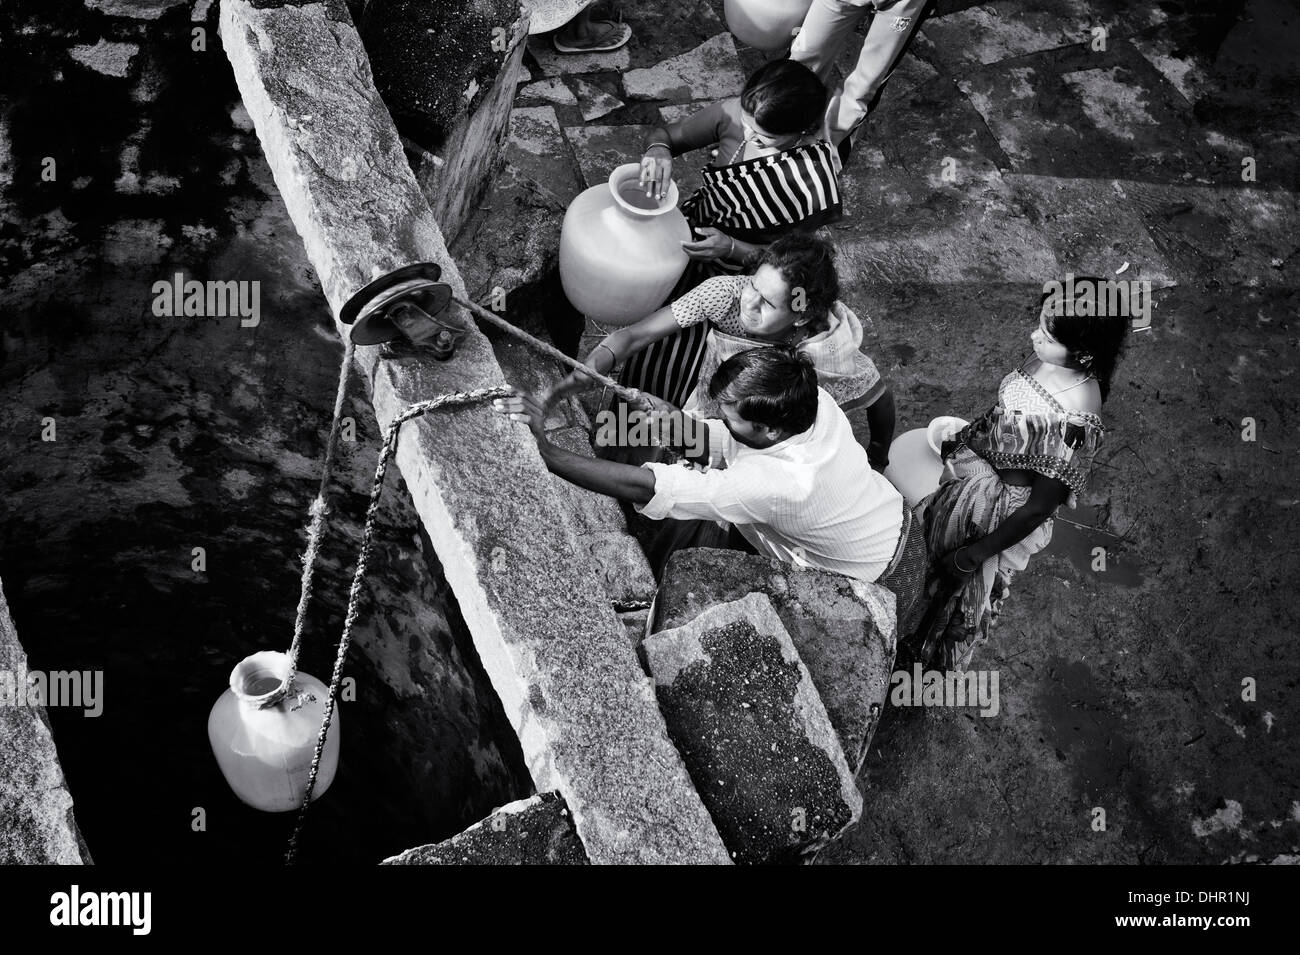 Indian women and men drawing water from a well in a rural Indian village street. Andhra Pradesh, India . Monochrome Stock Photo